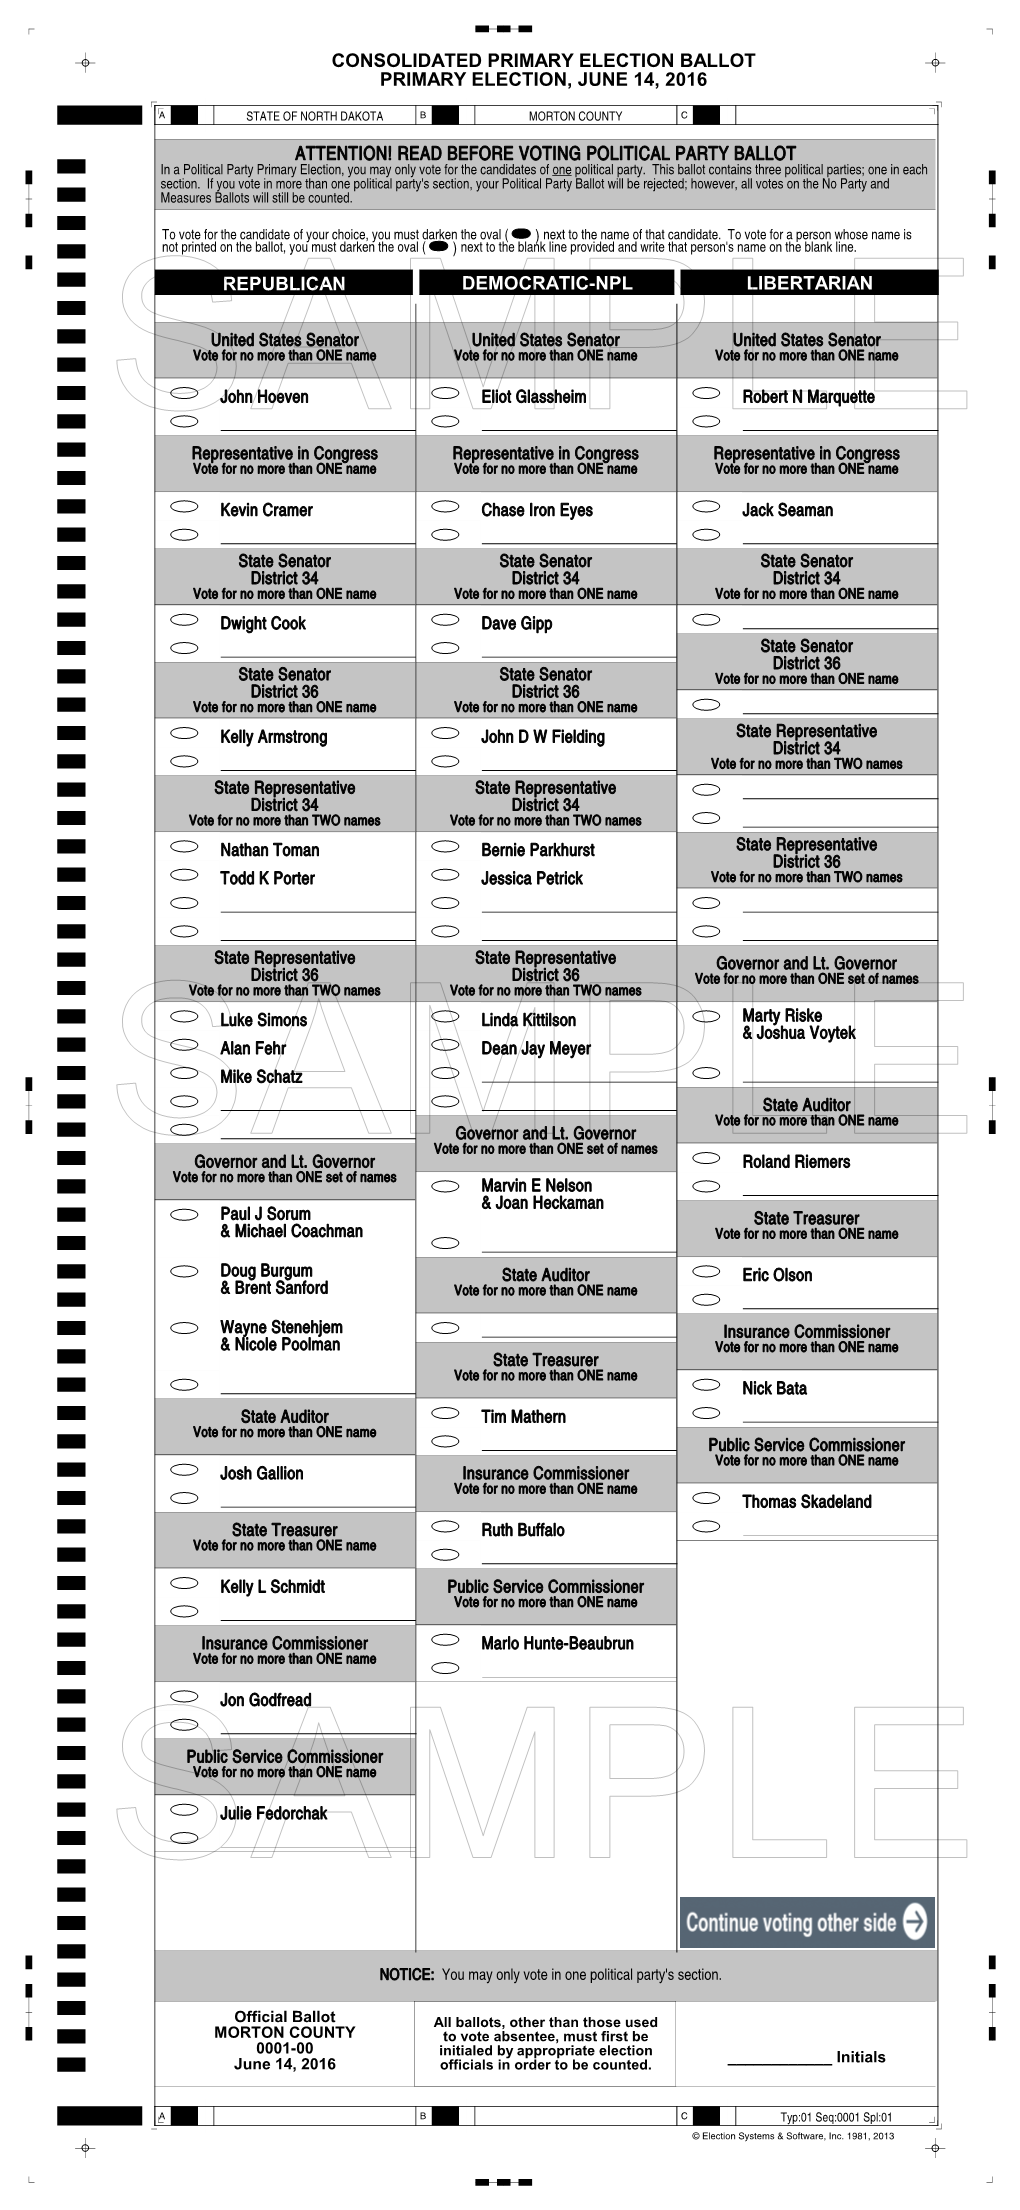 Consolidated Primary Election Ballot Primary Election, June 14, 2016 Republican Democratic-Npl Libertarian